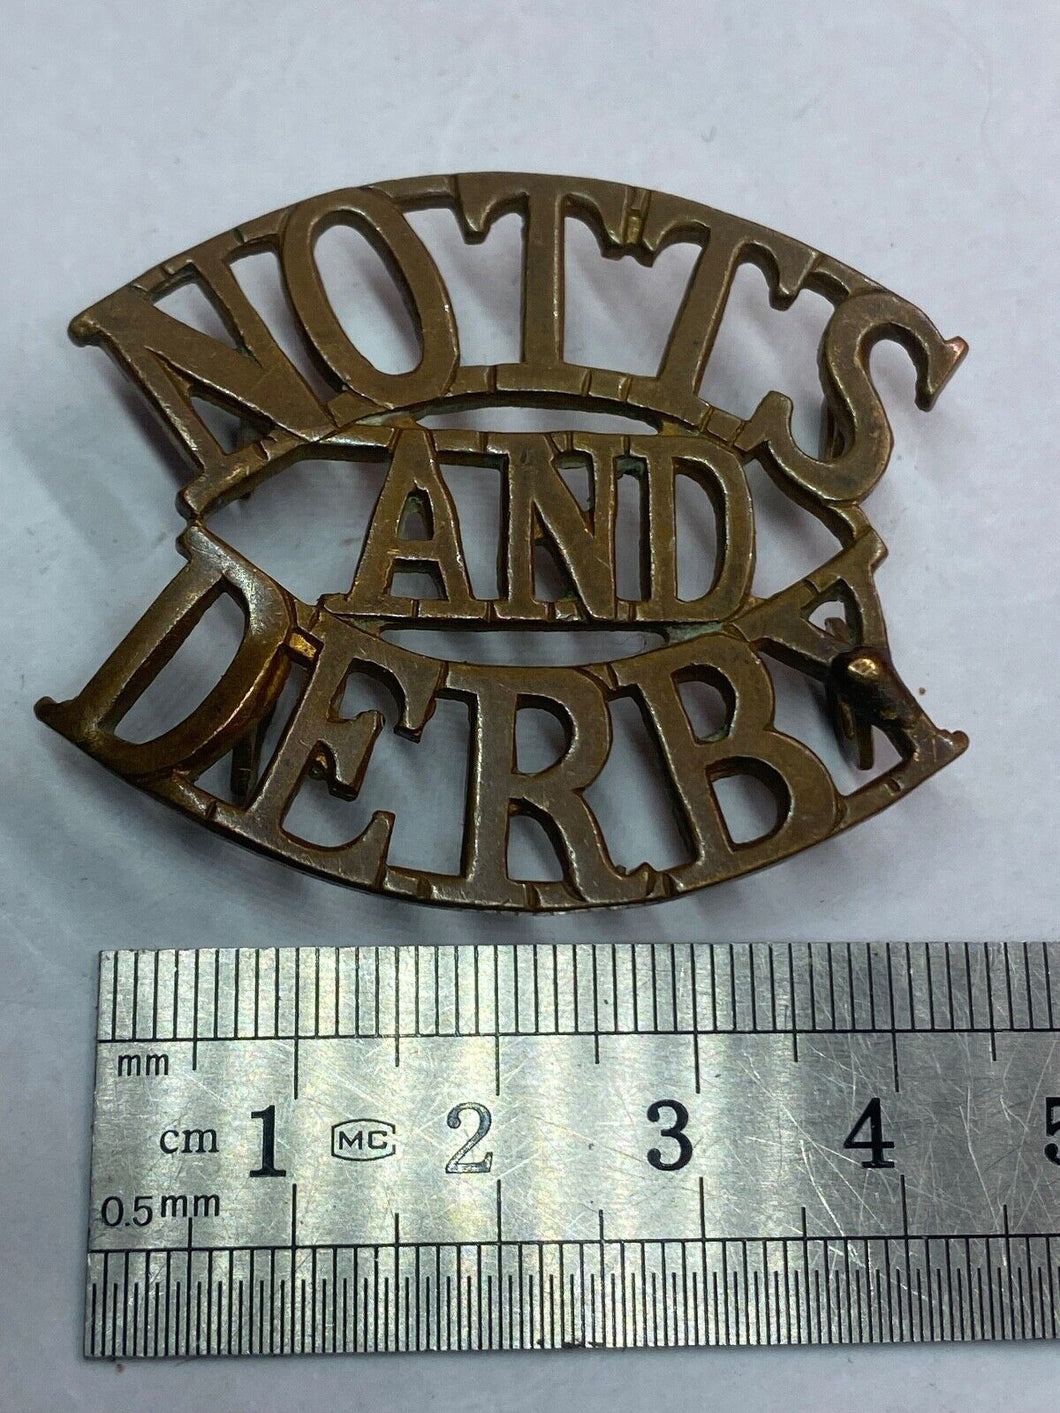 British Army - Notts and Derby Sherwood Foresters Regiment Shoulder Title